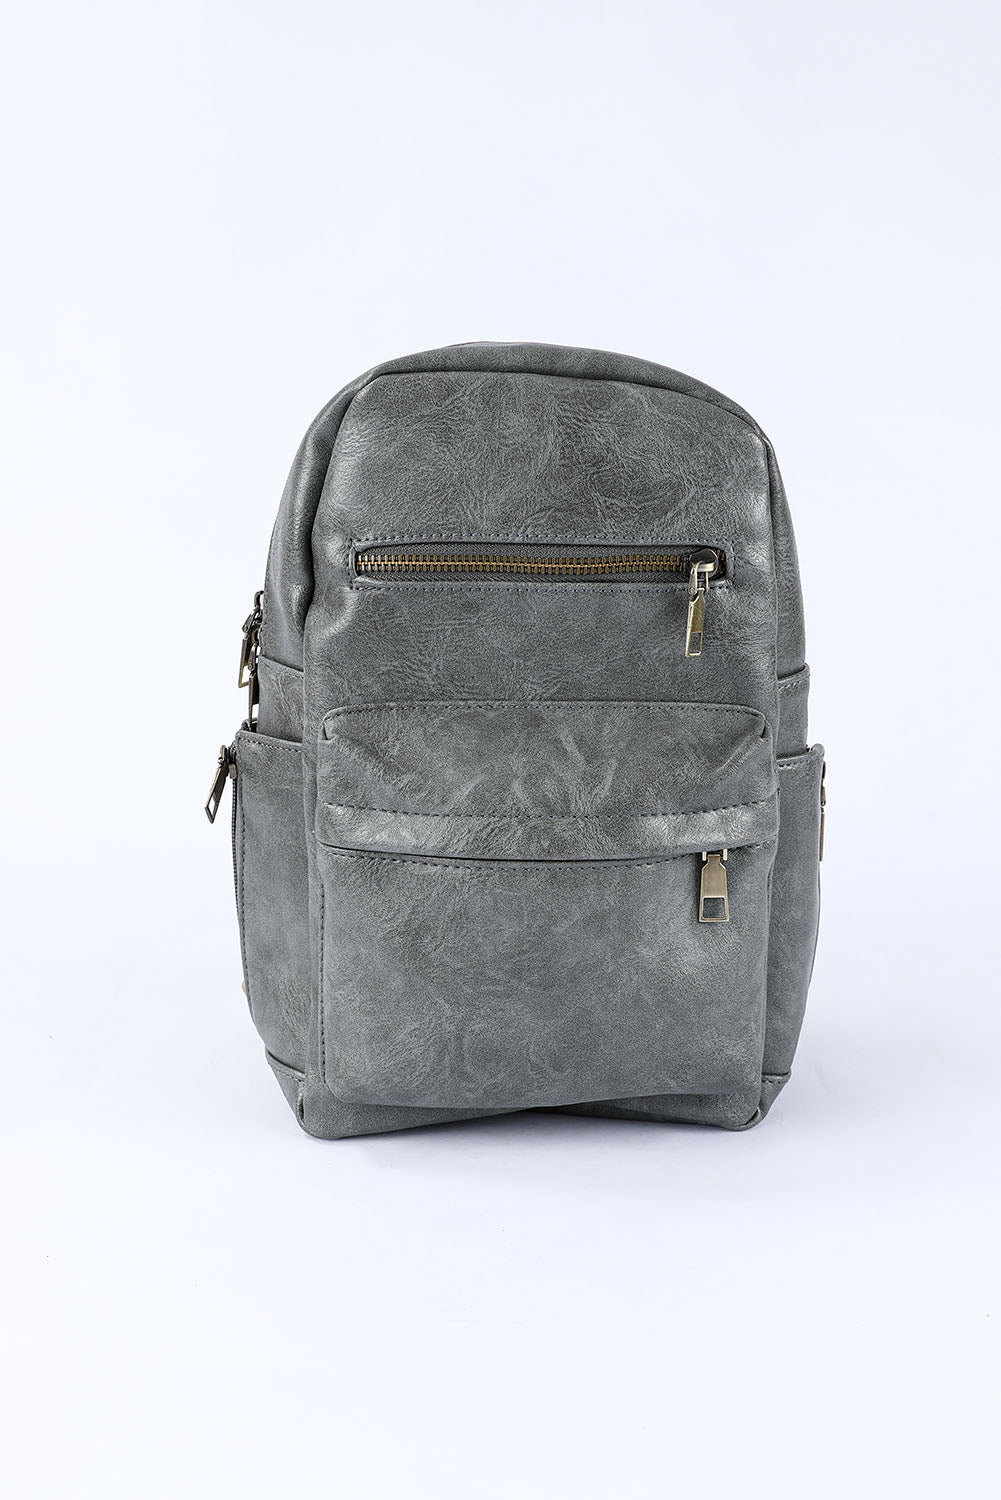 Gray Double Zipper Faux Leather Backpack Backpacks JT's Designer Fashion